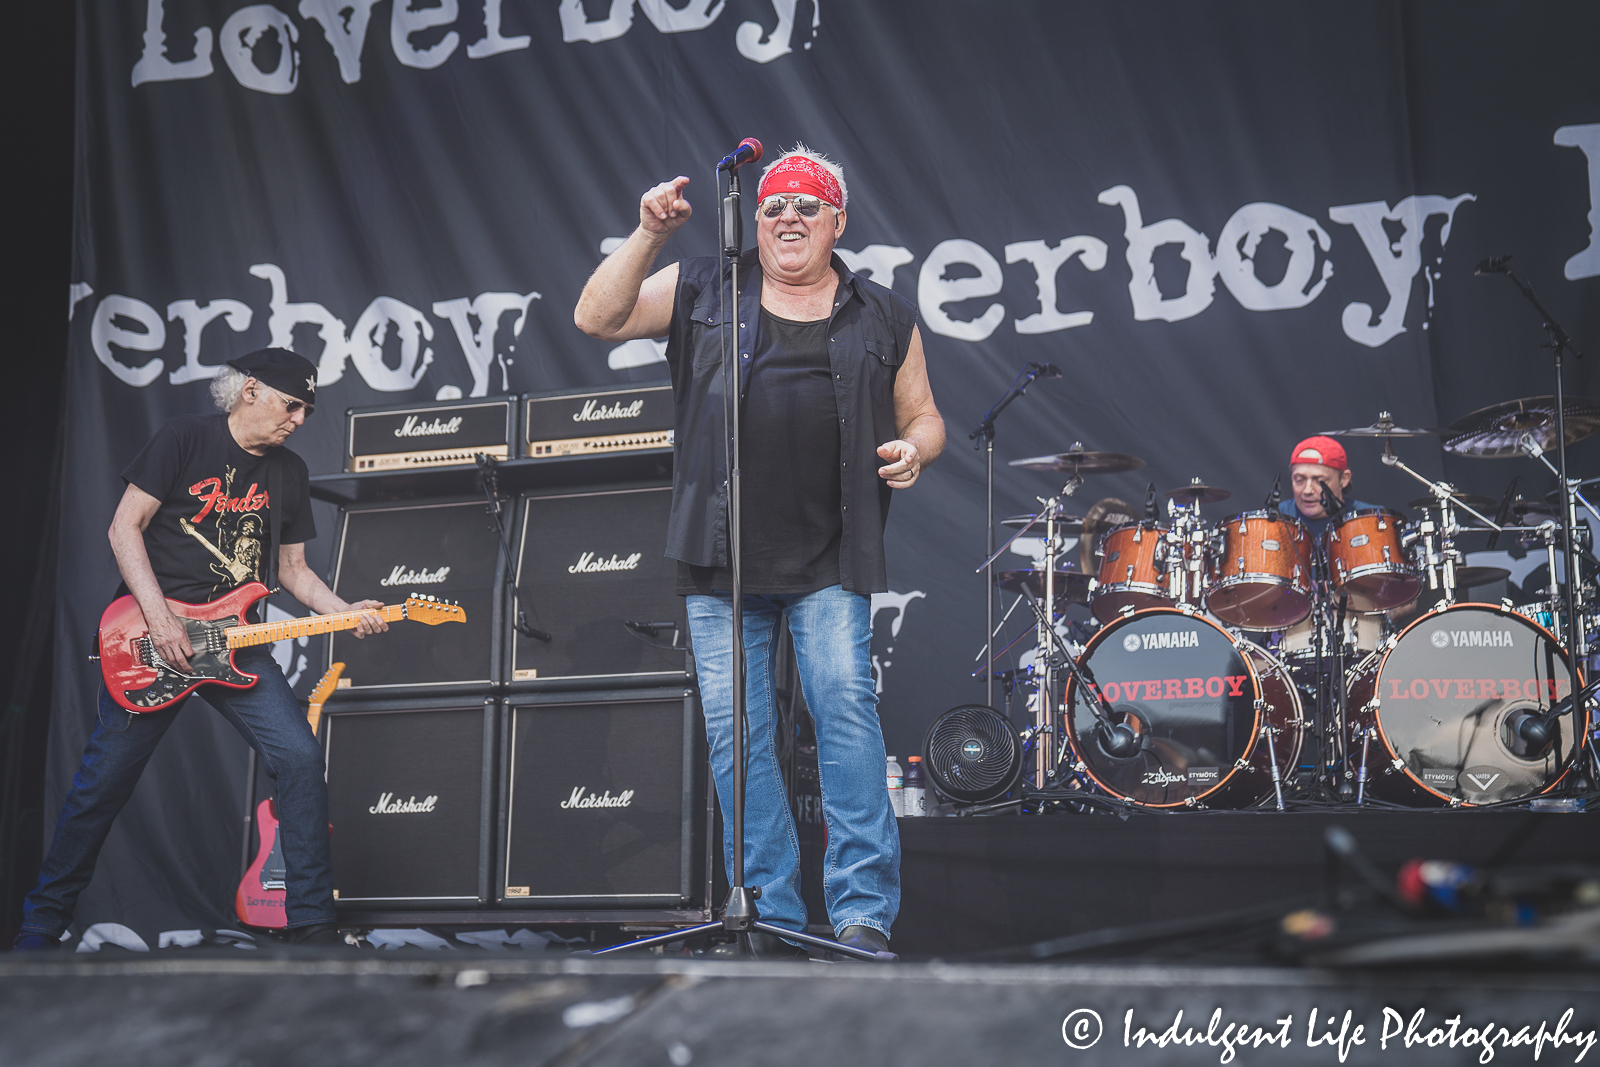 Frontman Mike Reno of Loverboy performing with guitarist Paul Dean and drummer Matt Frenette at Starlight Theatre in Kansas City, MO on June 14, 2022.